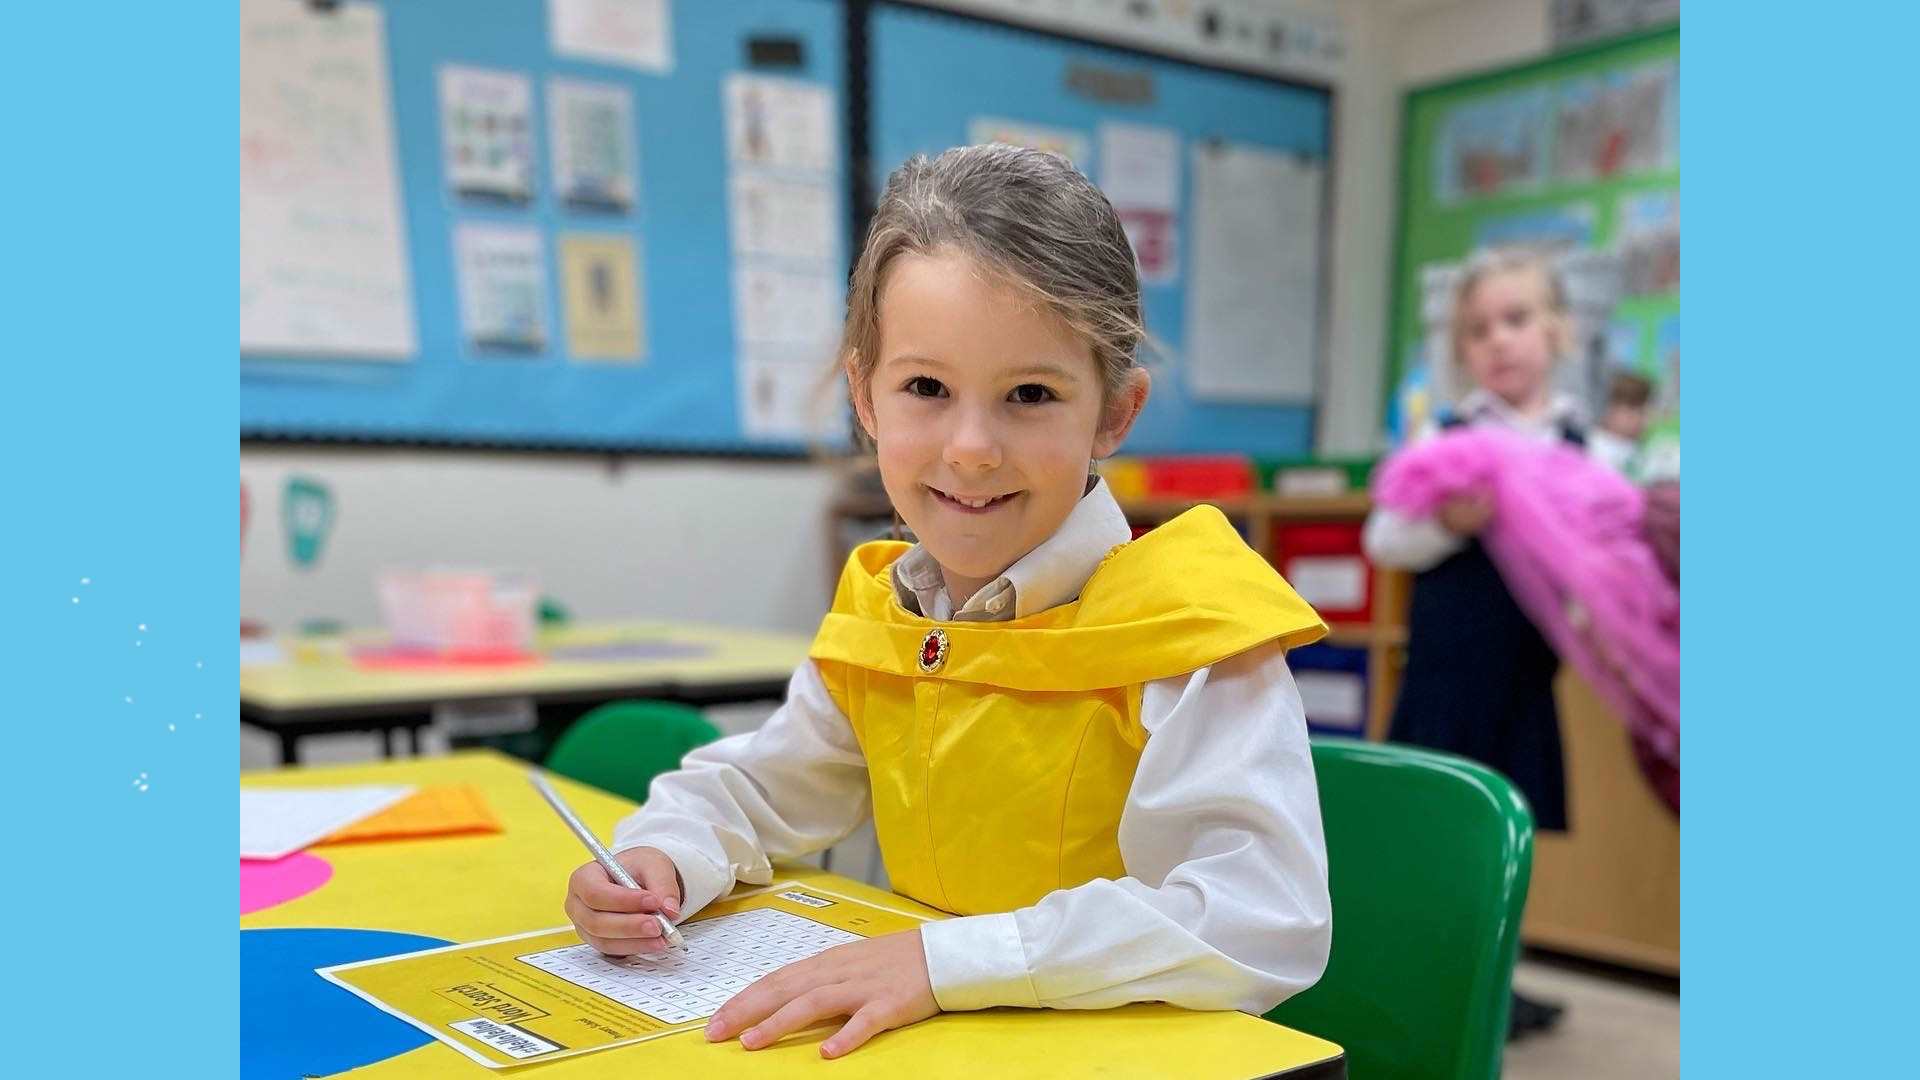 A primary school child doing a #HelloYellow word search and wearing a yellow dress.